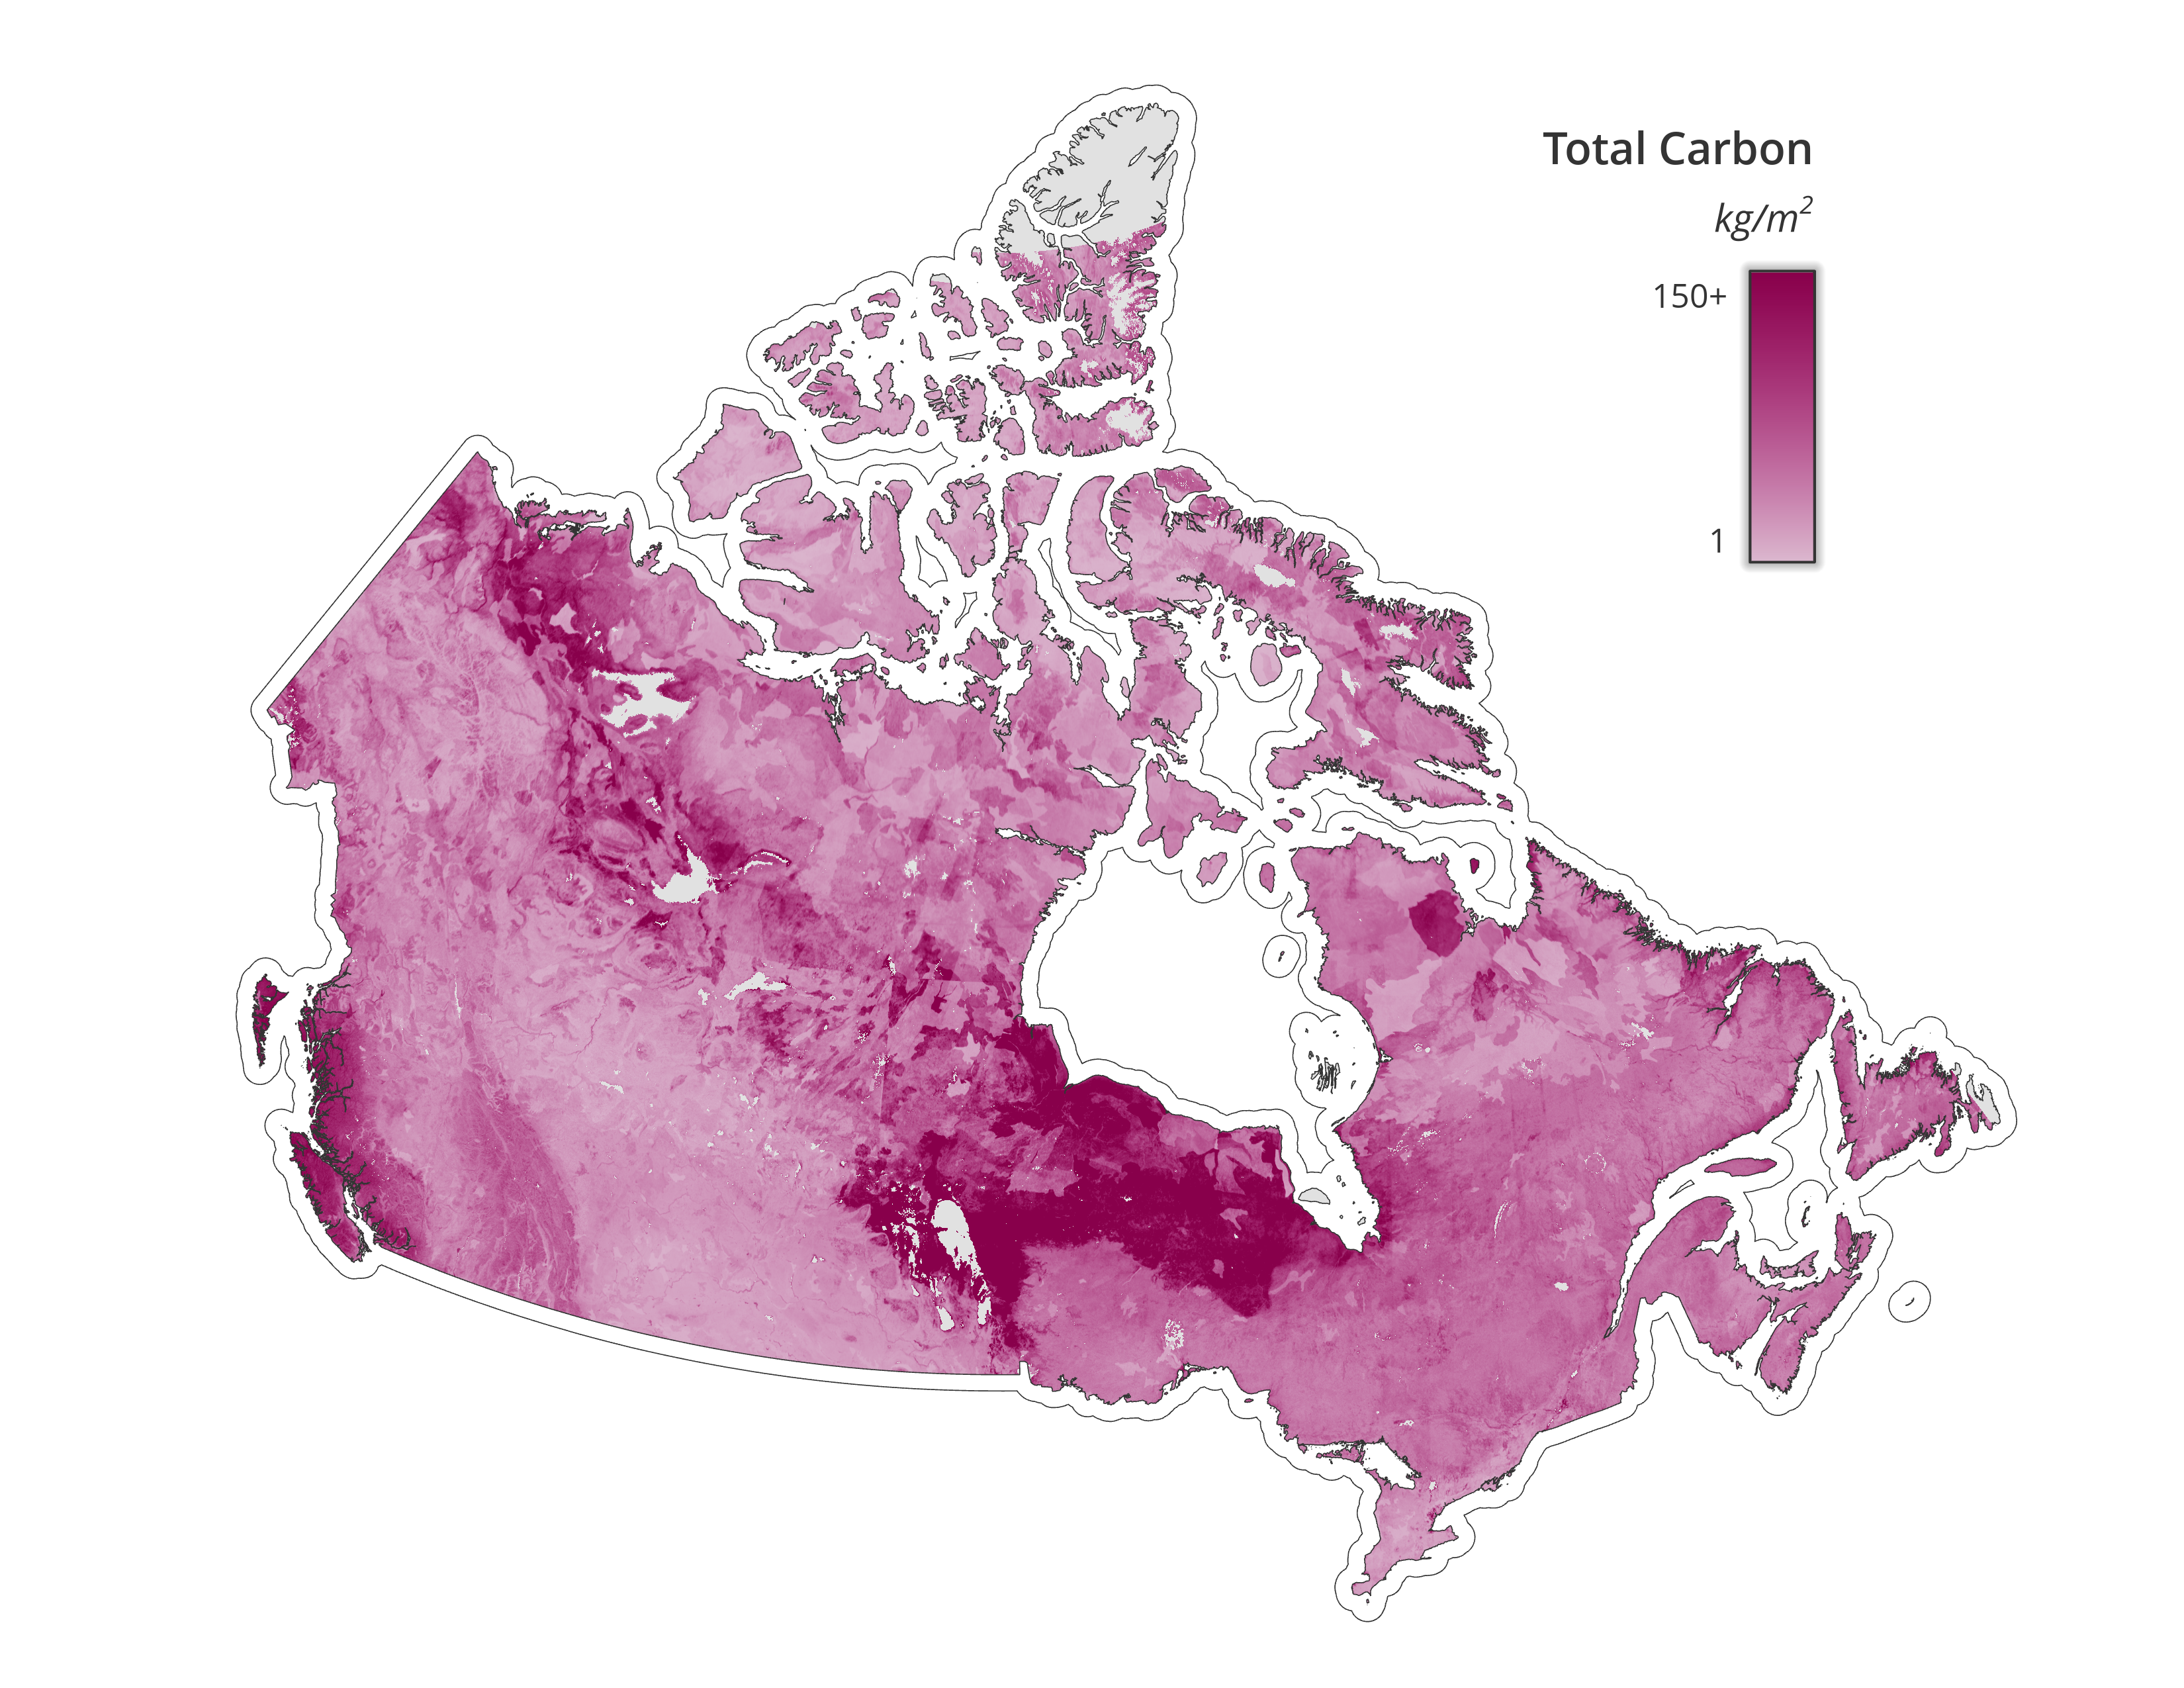 A map with gradient colouring showing the highest density carbon-rich areas in Canada. The darkest areas, indicating the highest levels, are in coastal British Columbia, a large swath of the north, and the Hudson and James Bay Lowlands. 